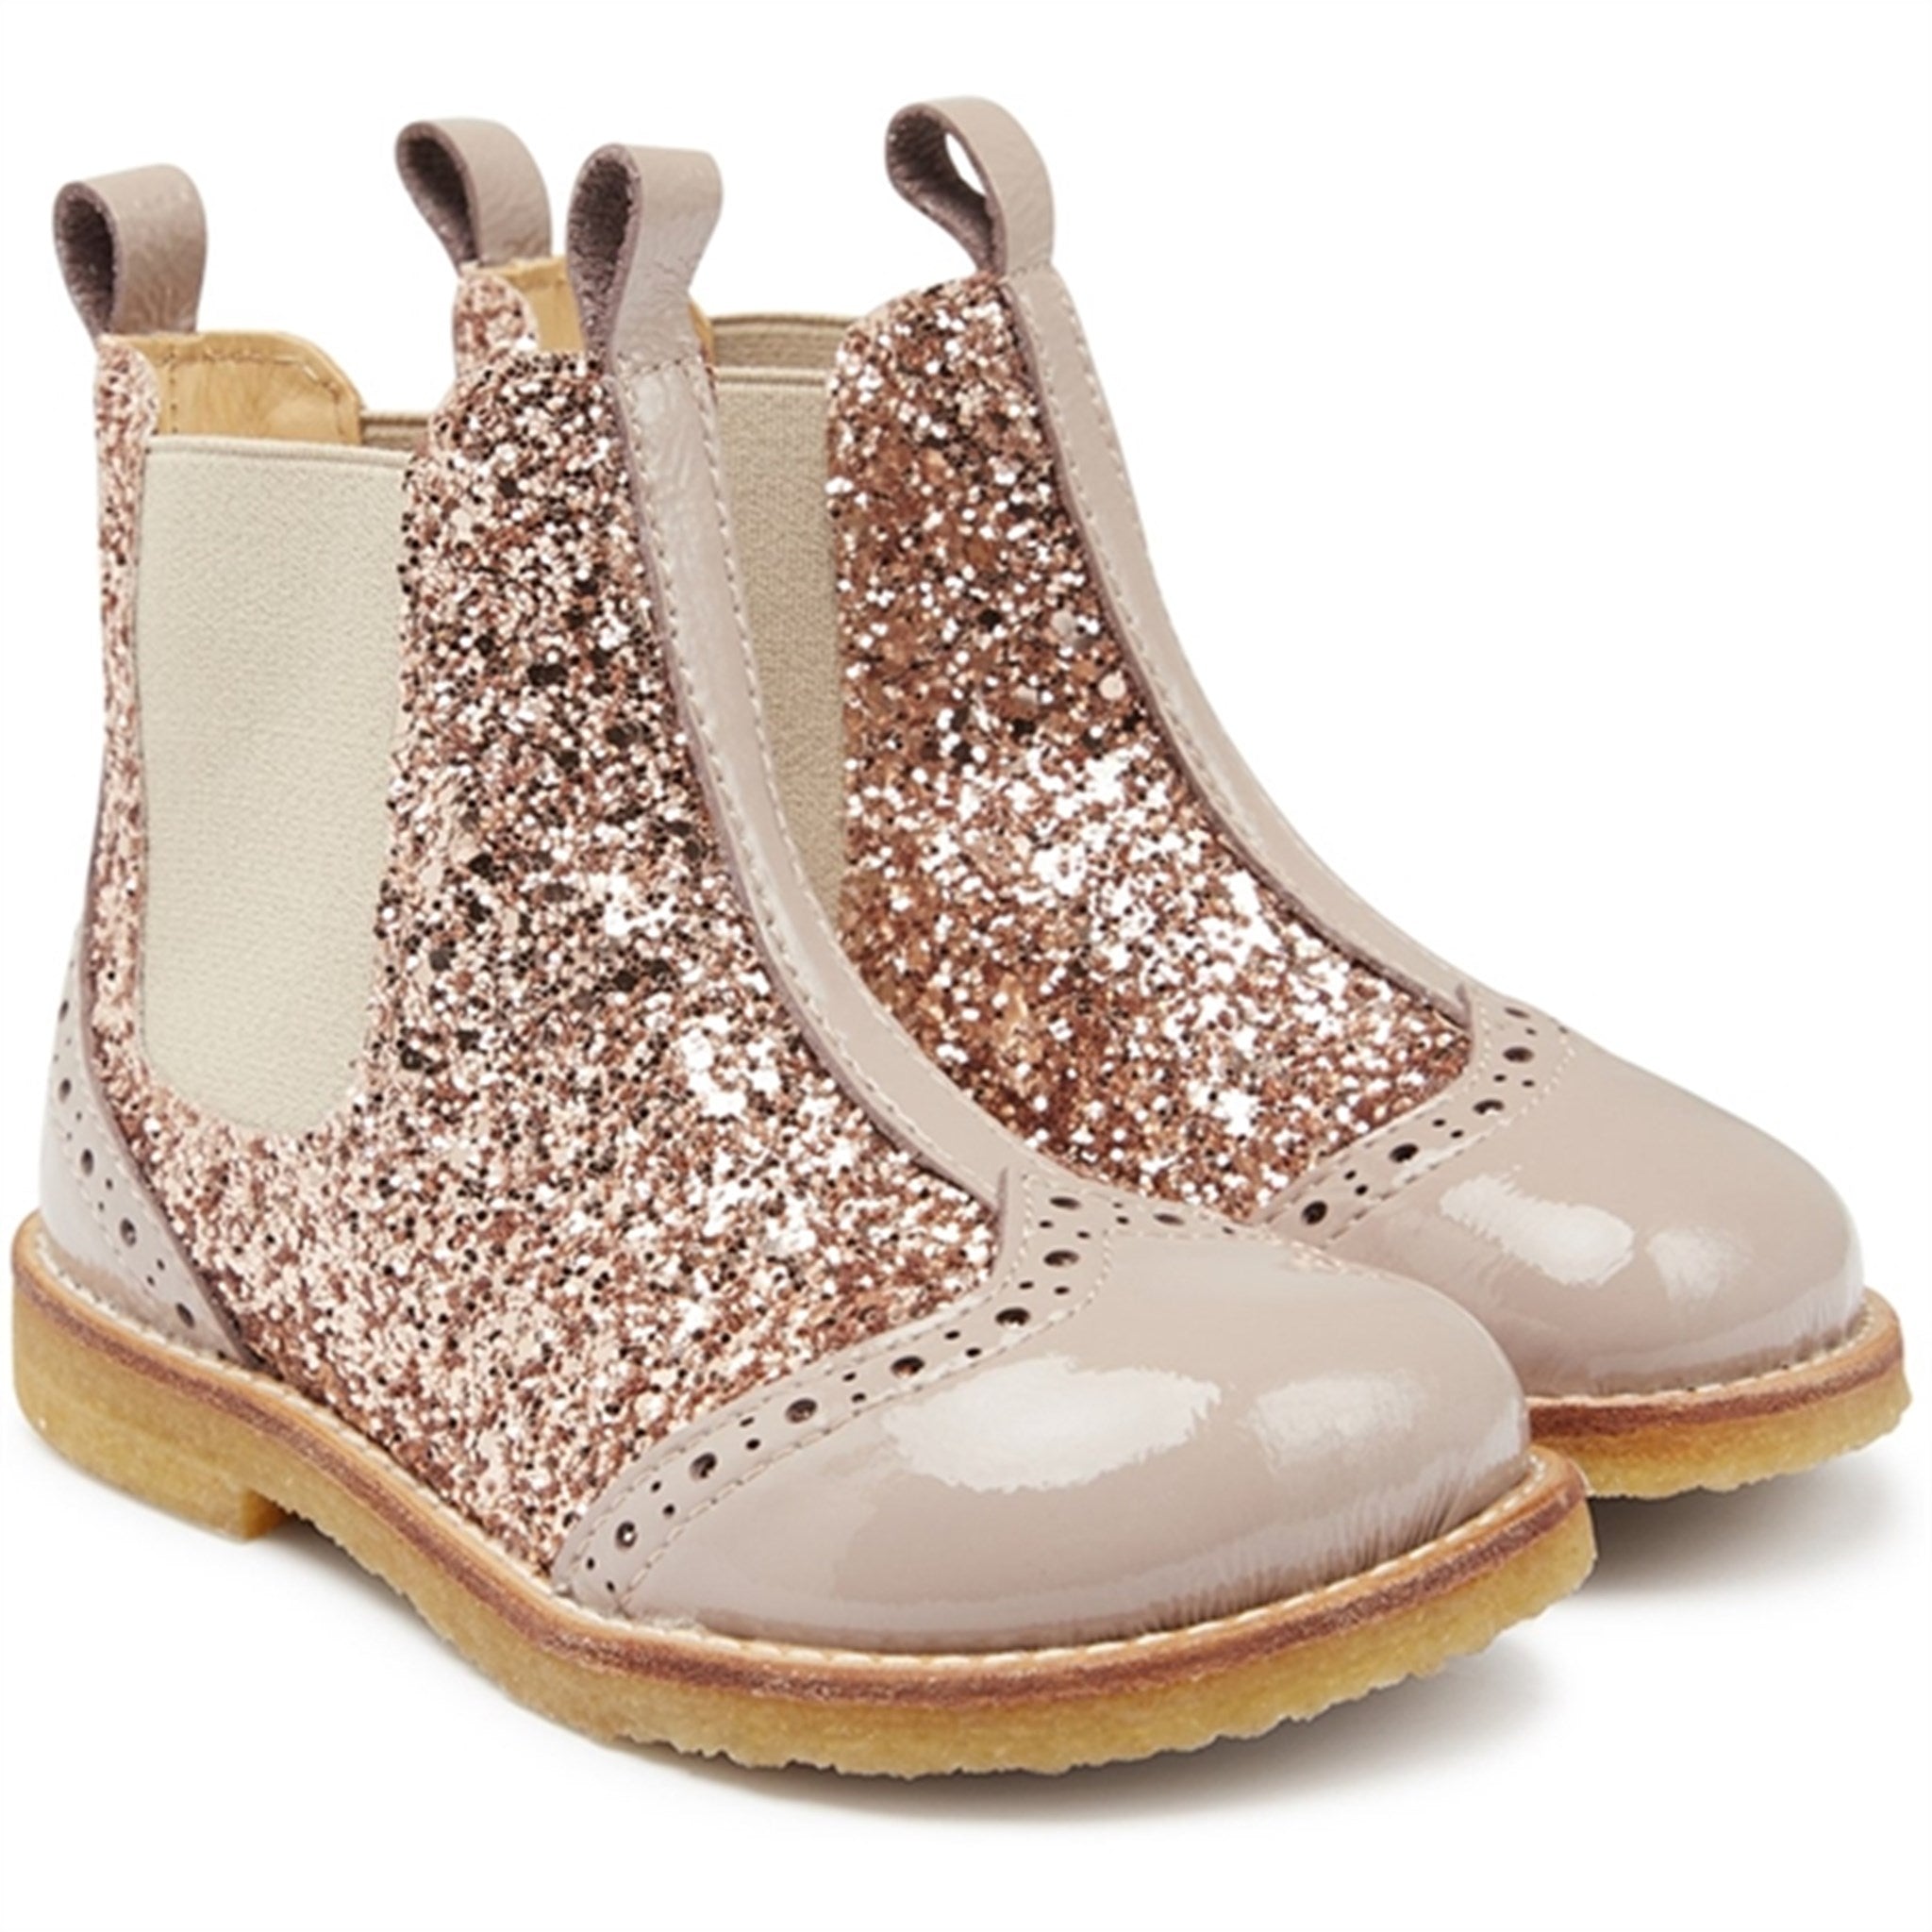 Angulus Chelsea Boots With Glitter Dusty Almond/Maple Glitter/Elastic